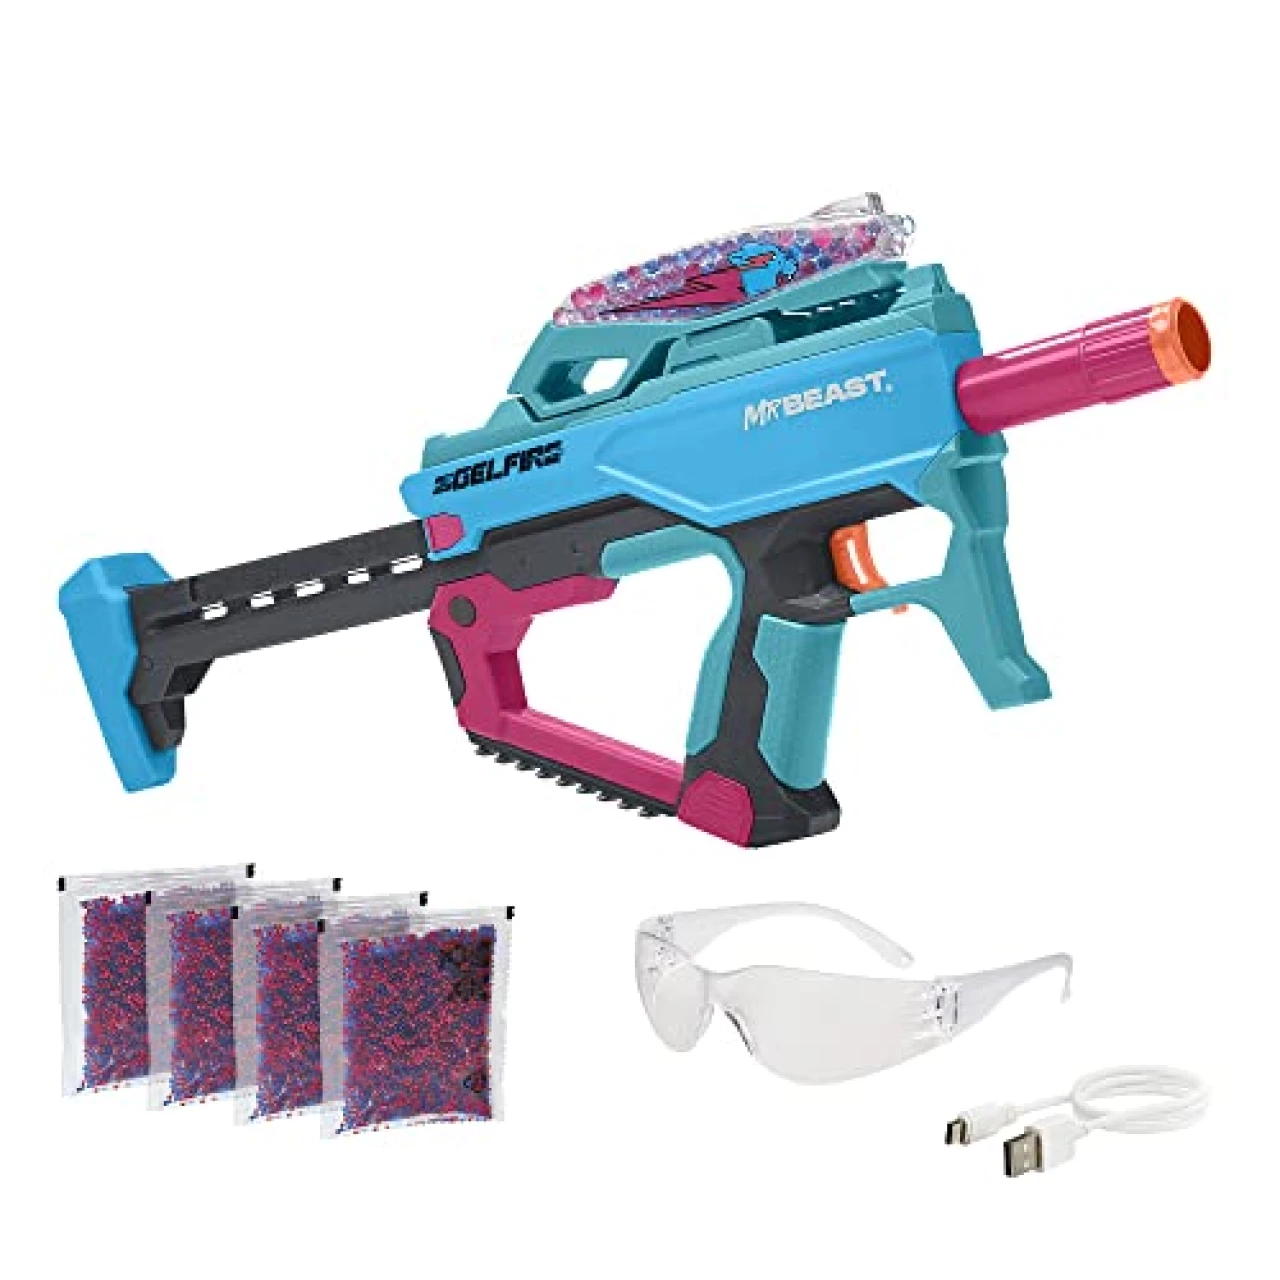 Nerf Pro Gelfire X MrBeast Full Auto Blaster &amp; 20,000 Gelfire Rounds, 300 Round Hopper, Rechargeable Battery, Eyewear, Ages 14 &amp; Up